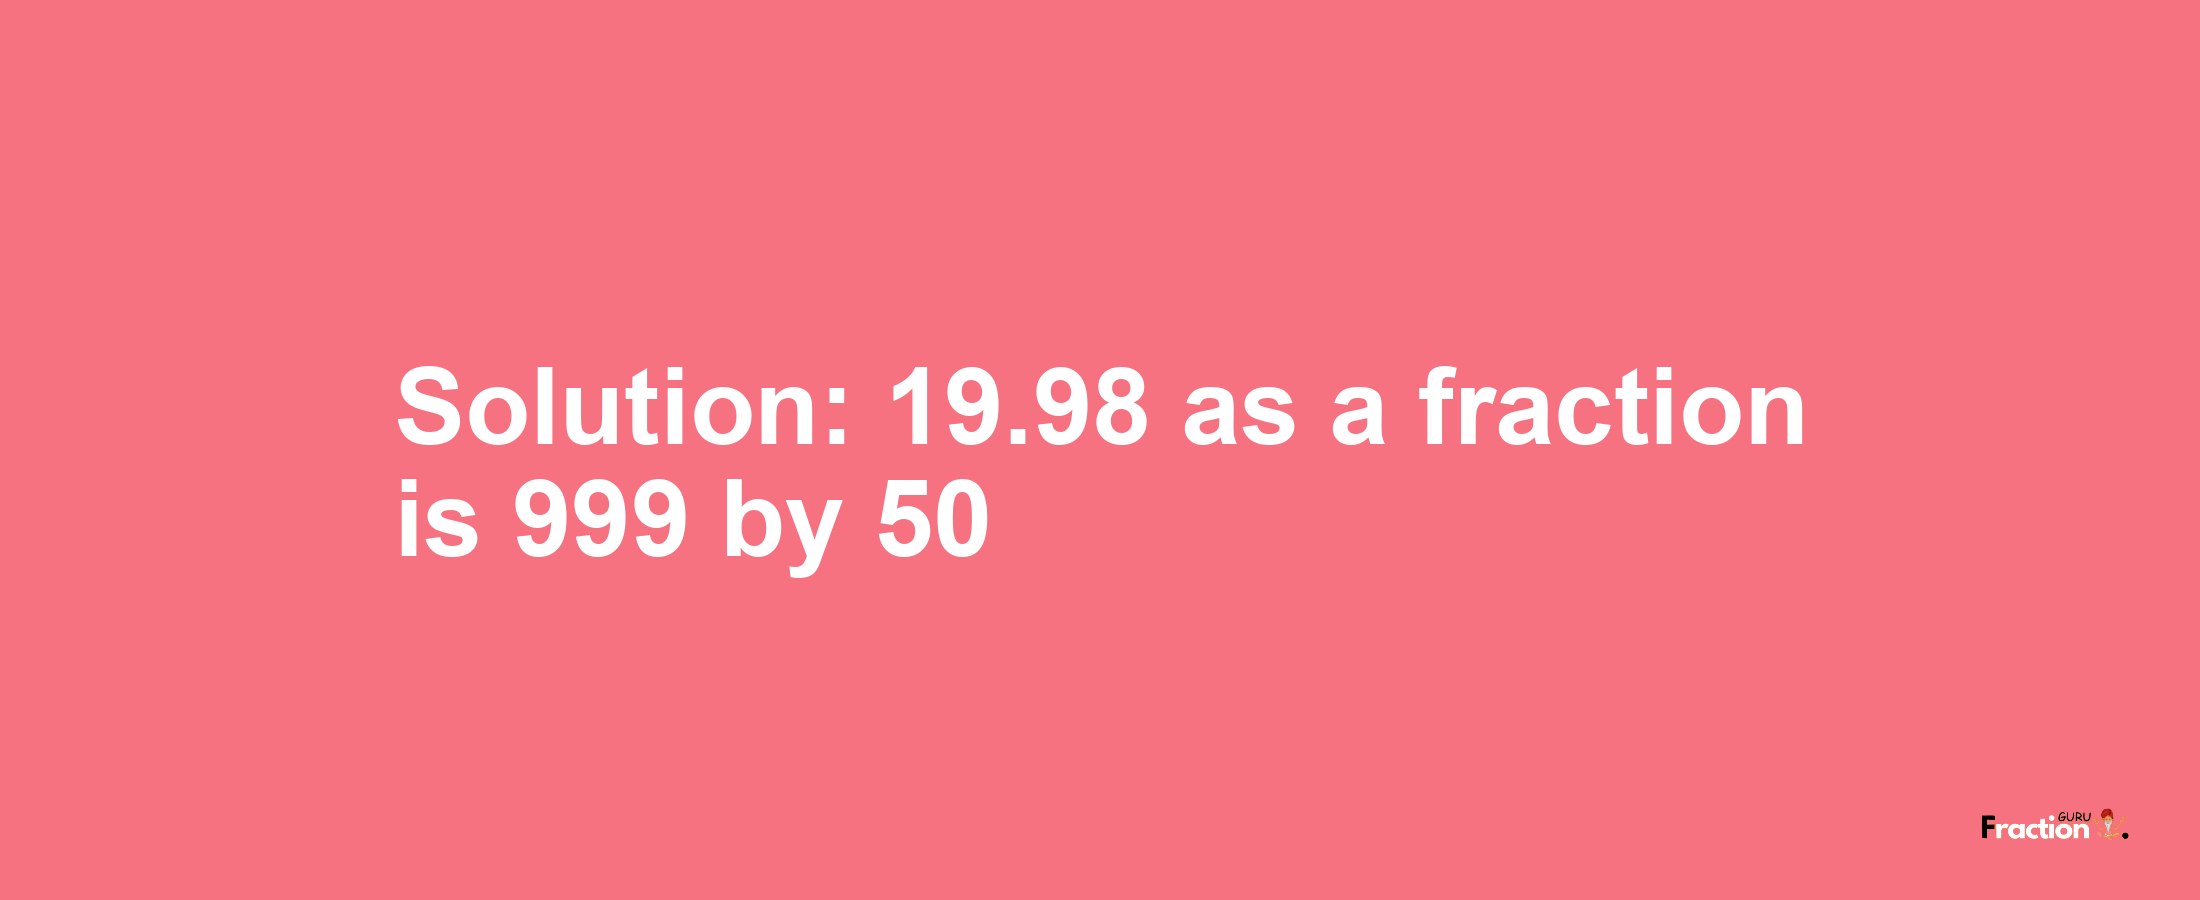 Solution:19.98 as a fraction is 999/50